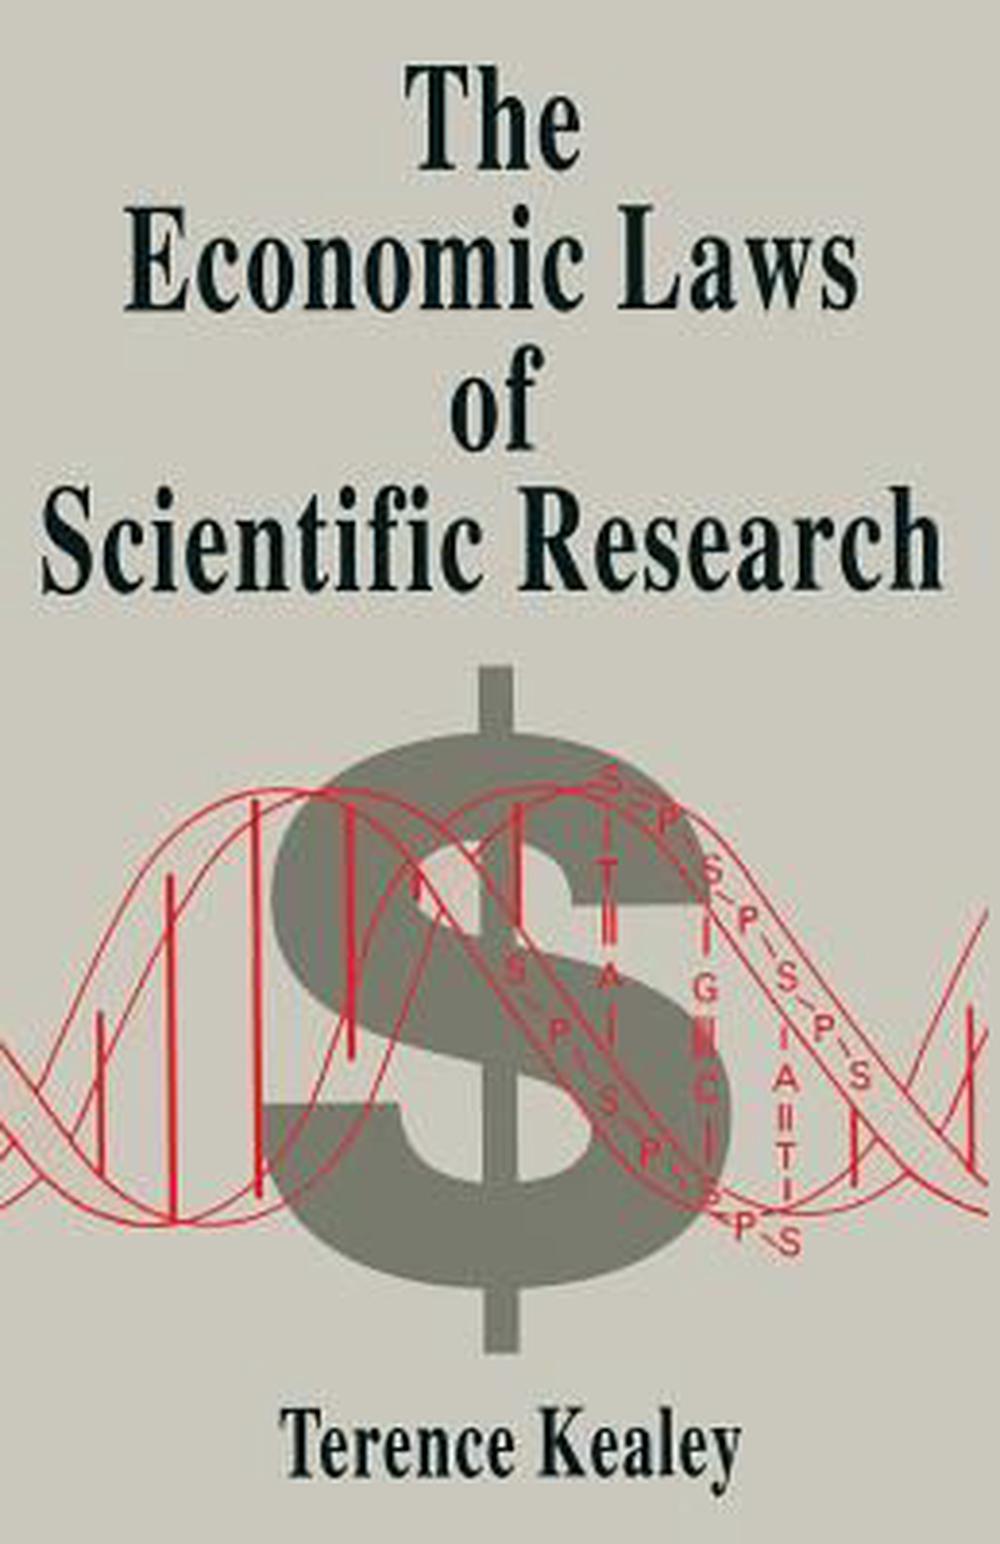 The Economic Laws Of Scientific Research By Terence Kealey English